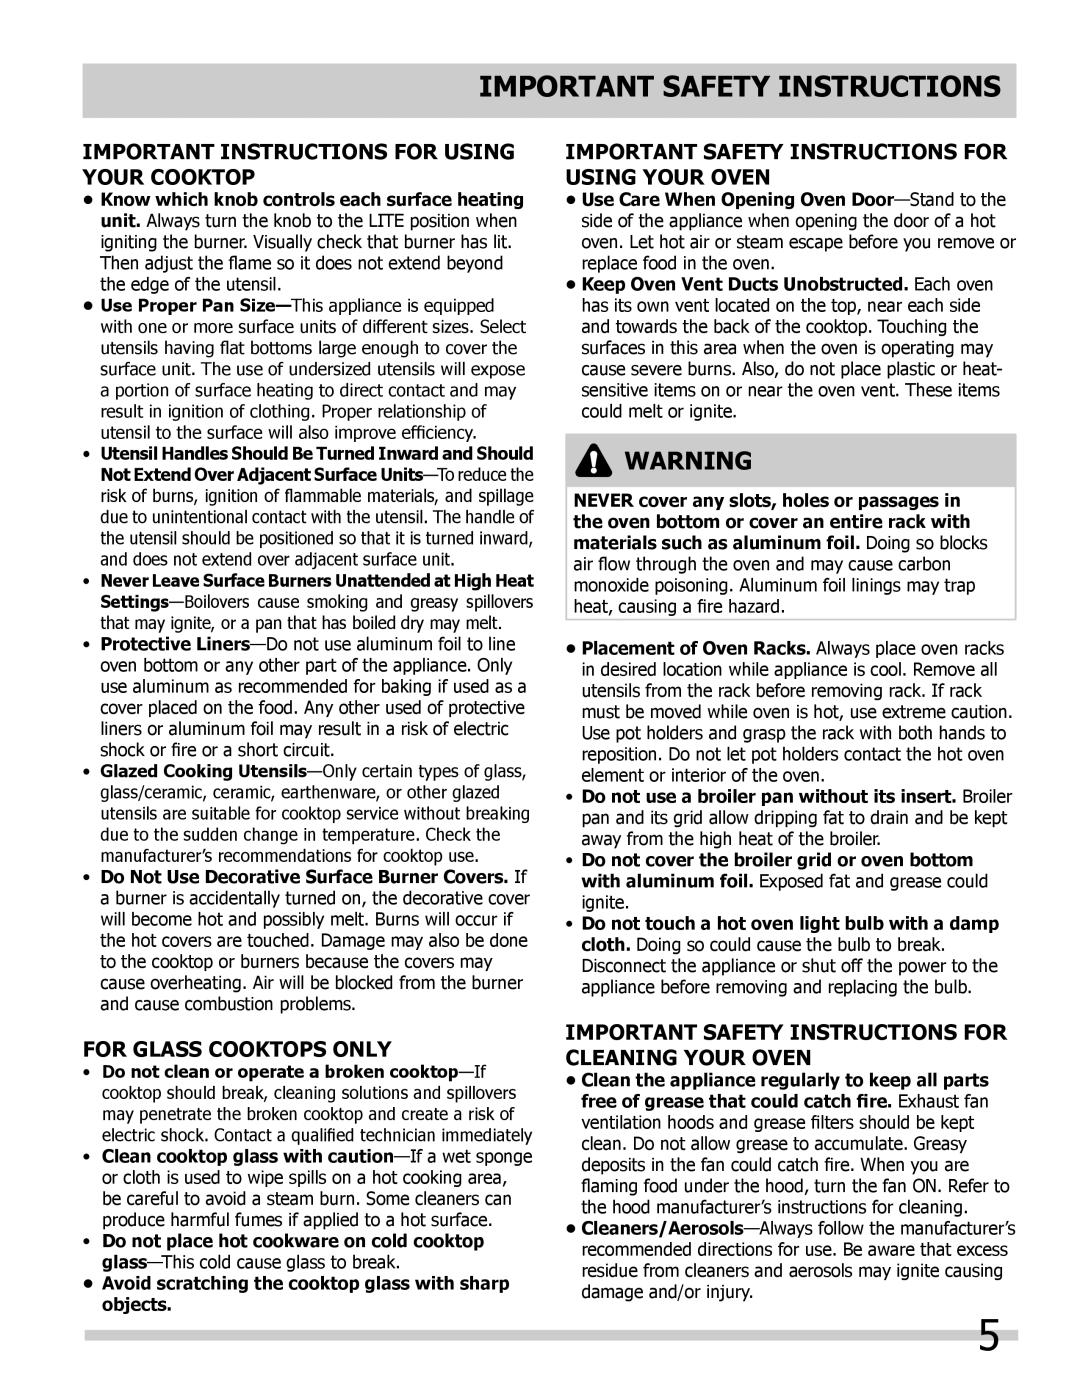 Frigidaire FPDF4085KF IMPORTANT INSTRUCTIONS FOR USING YOUR cooktop, Important Safety Instructions For Using Your Oven 